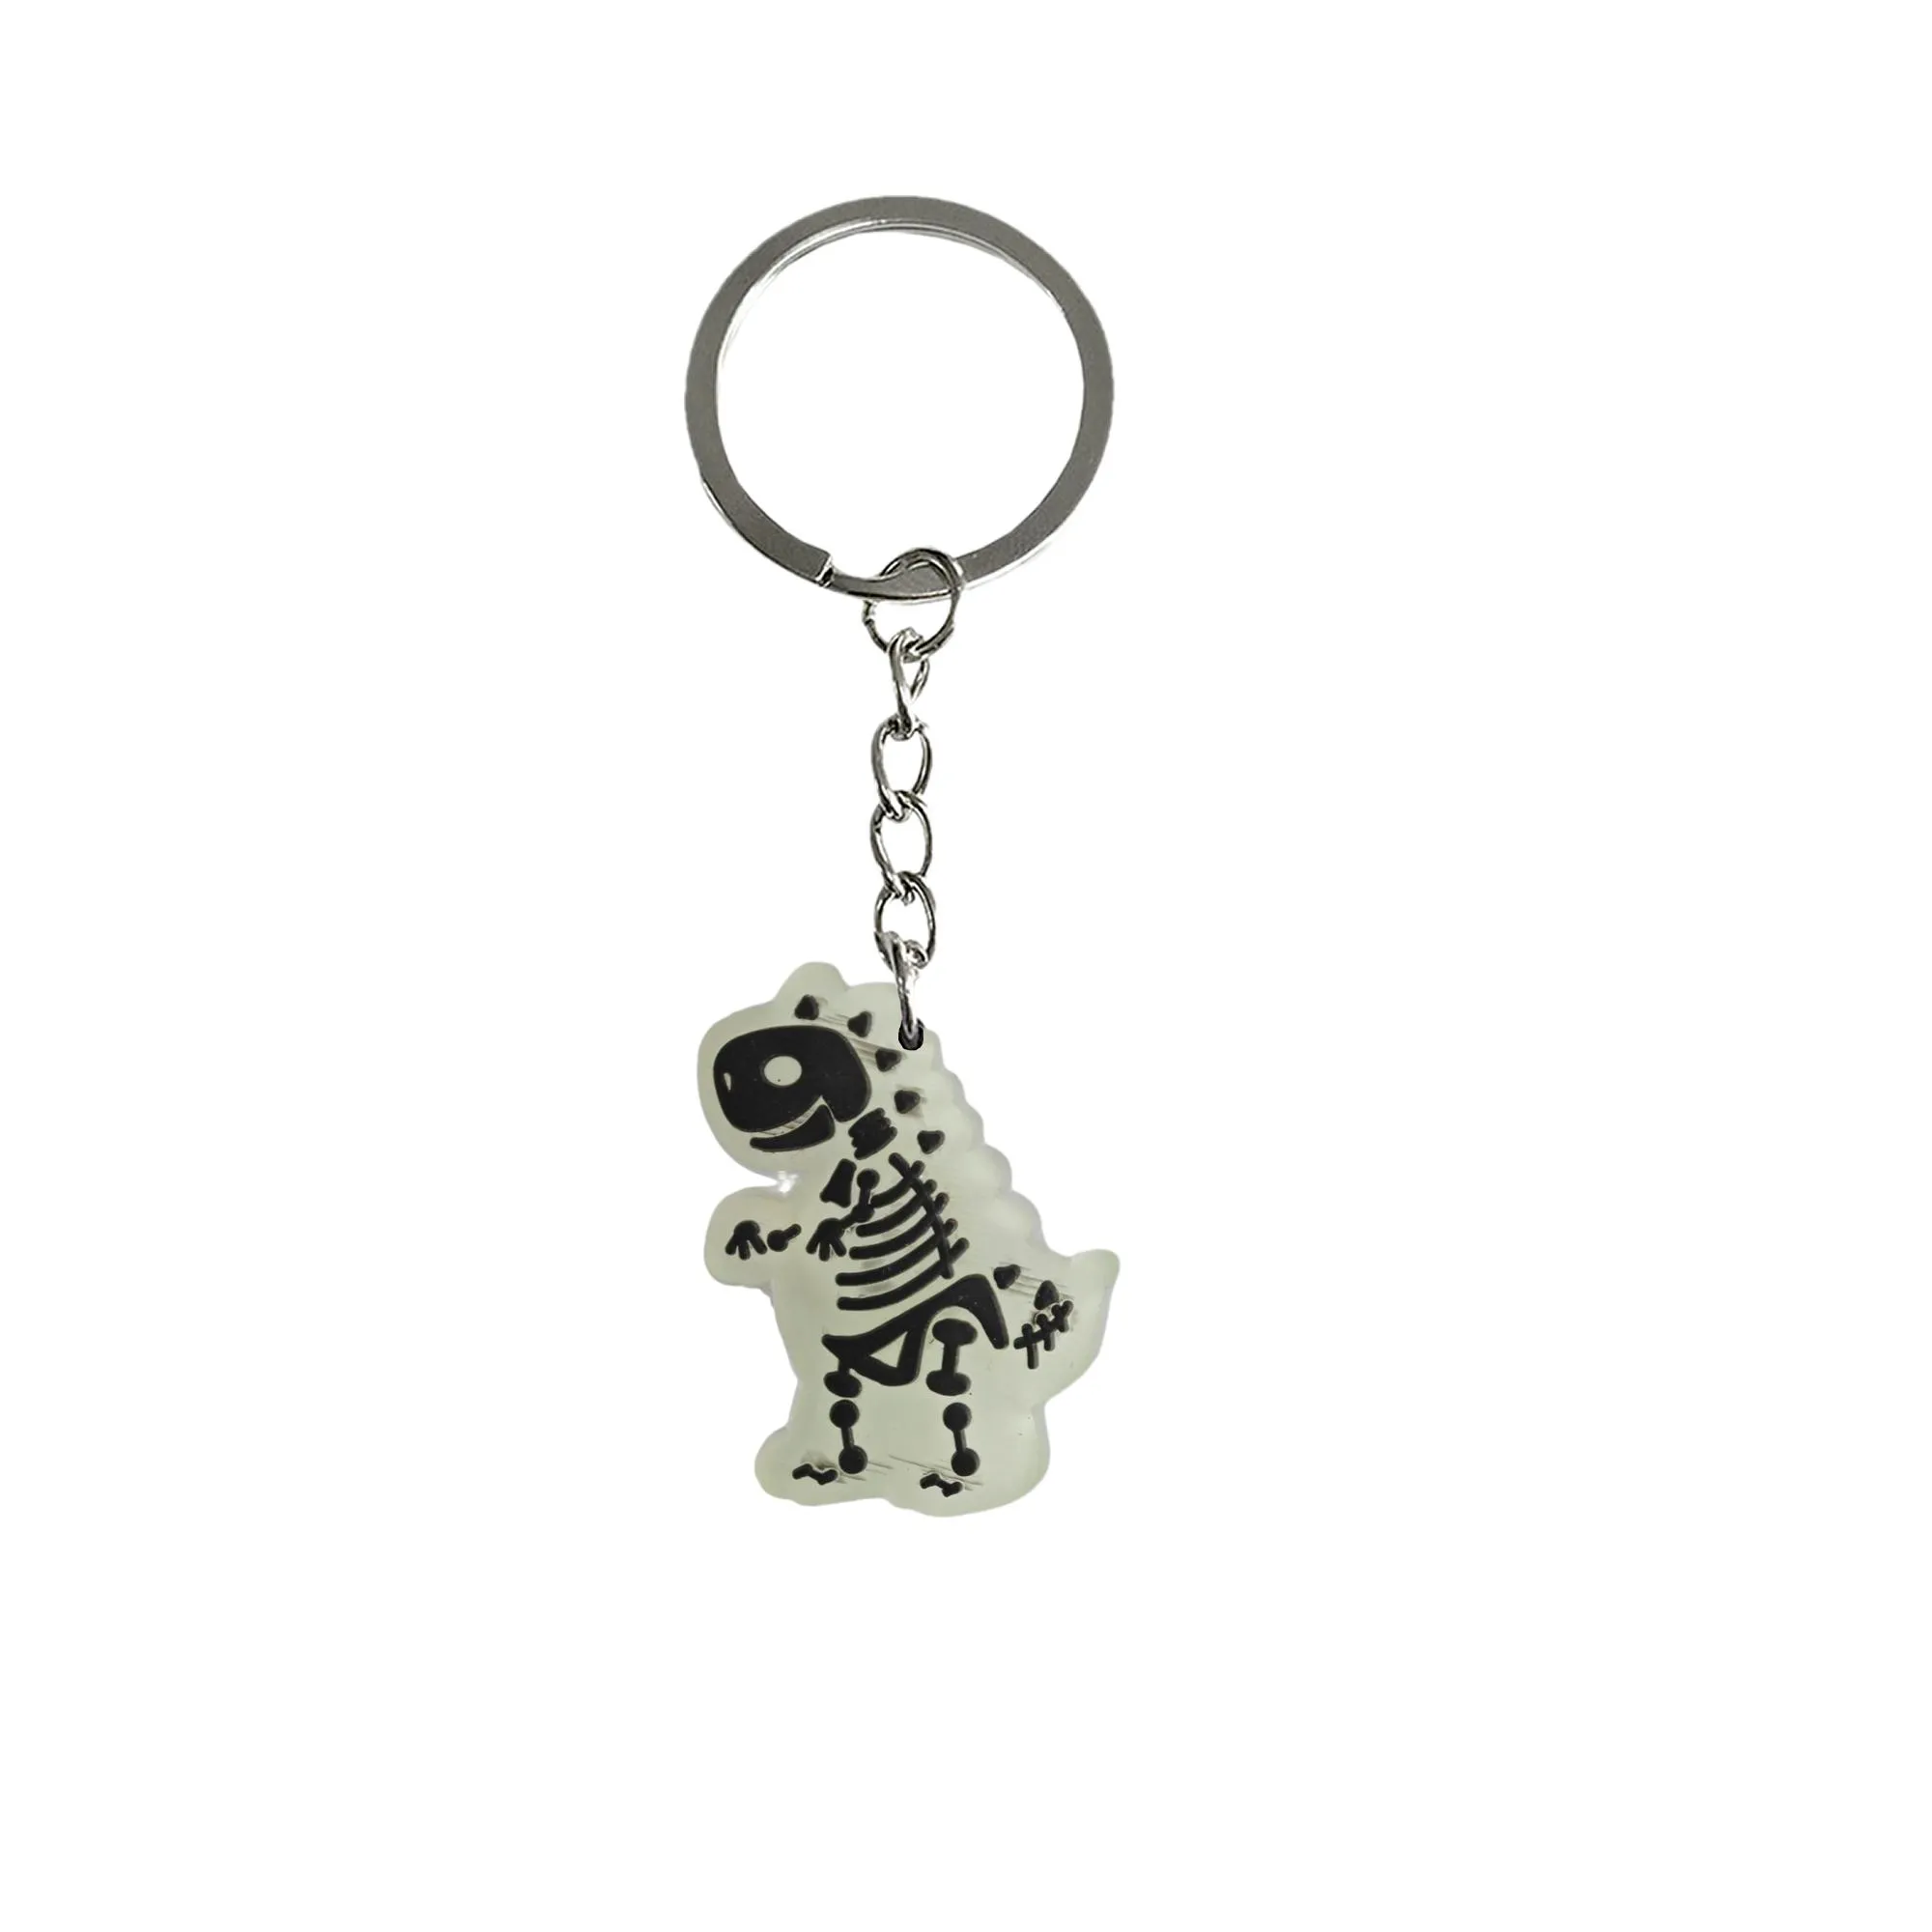 fluorescent dinosaur 32 keychain mini cute keyring for classroom prizes keyrings bags backpack car charms suitable schoolbag key chain kid boy girl party favors gift anime cool keychains backpacks boys